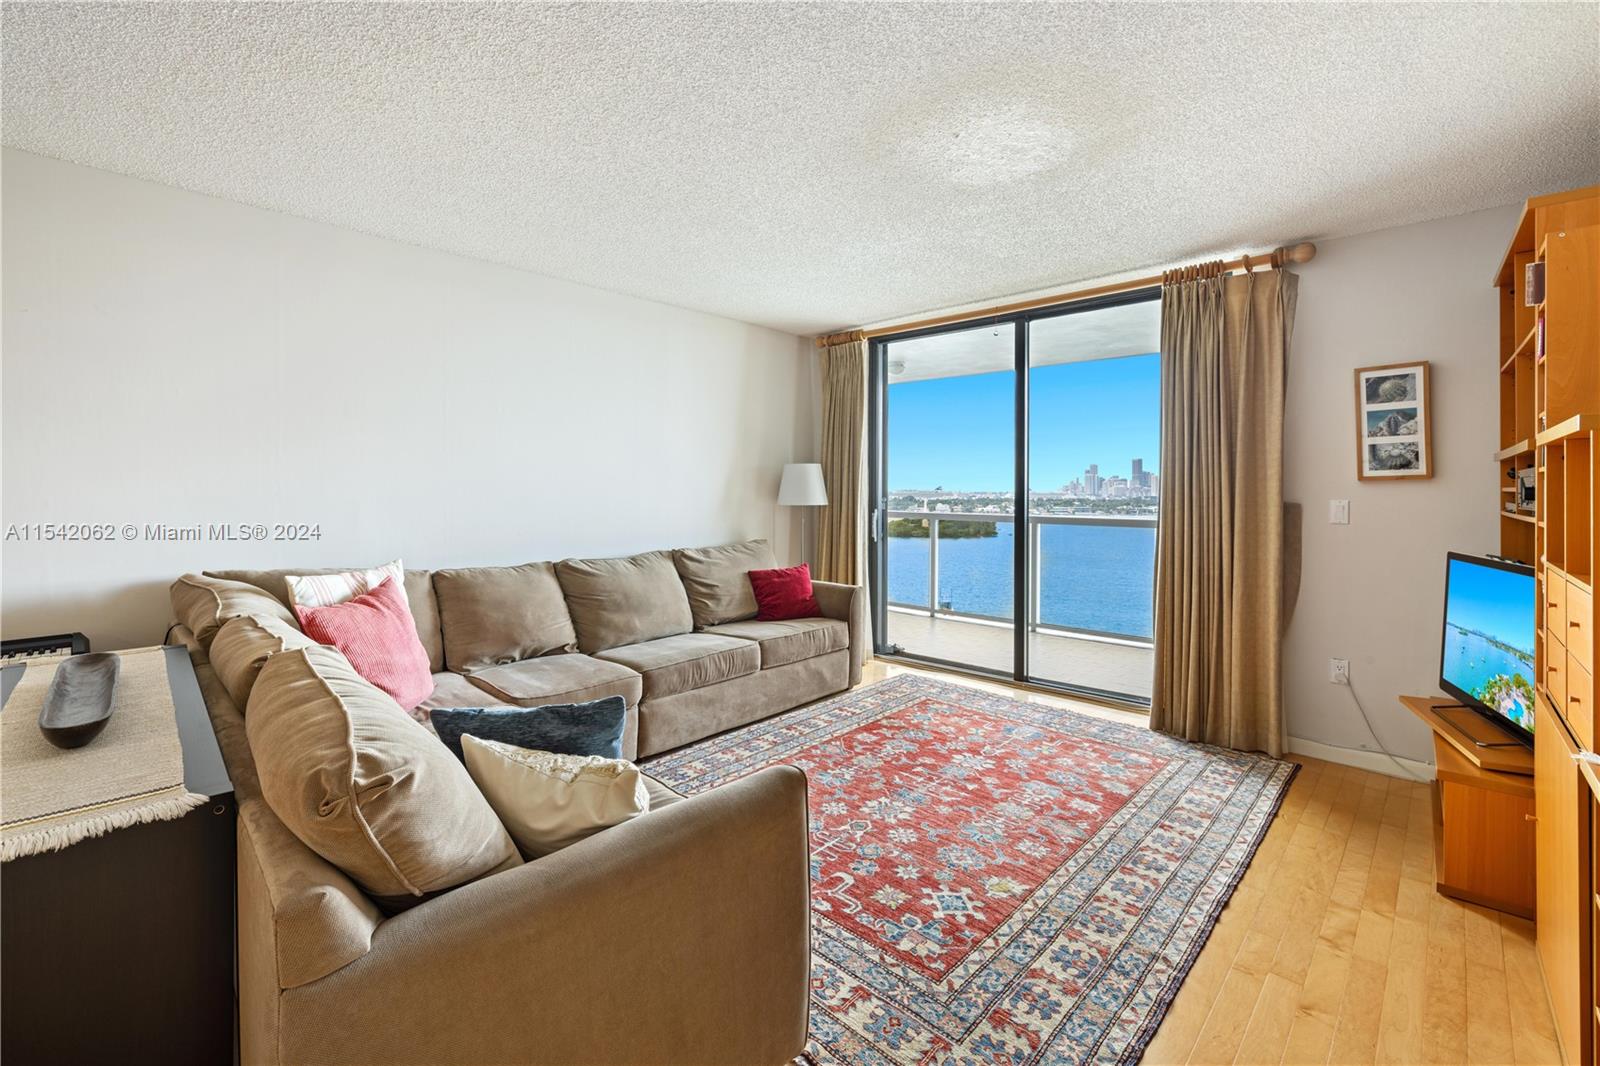 Great opportunity to rent at 9 island av.  The unit is on the 15th floor with unobstructed bay and downtown views.  Original well-kept condition it will be re painted.  Building is in the final face of major renovation, and it offers amazing brand-new fitness center, kid room, yoga room, party room and on-site restaurant.   Pool is still closed,( hot tub open)  and impact windows and doors are currently being installed so balcony is closed    Available May 1st.